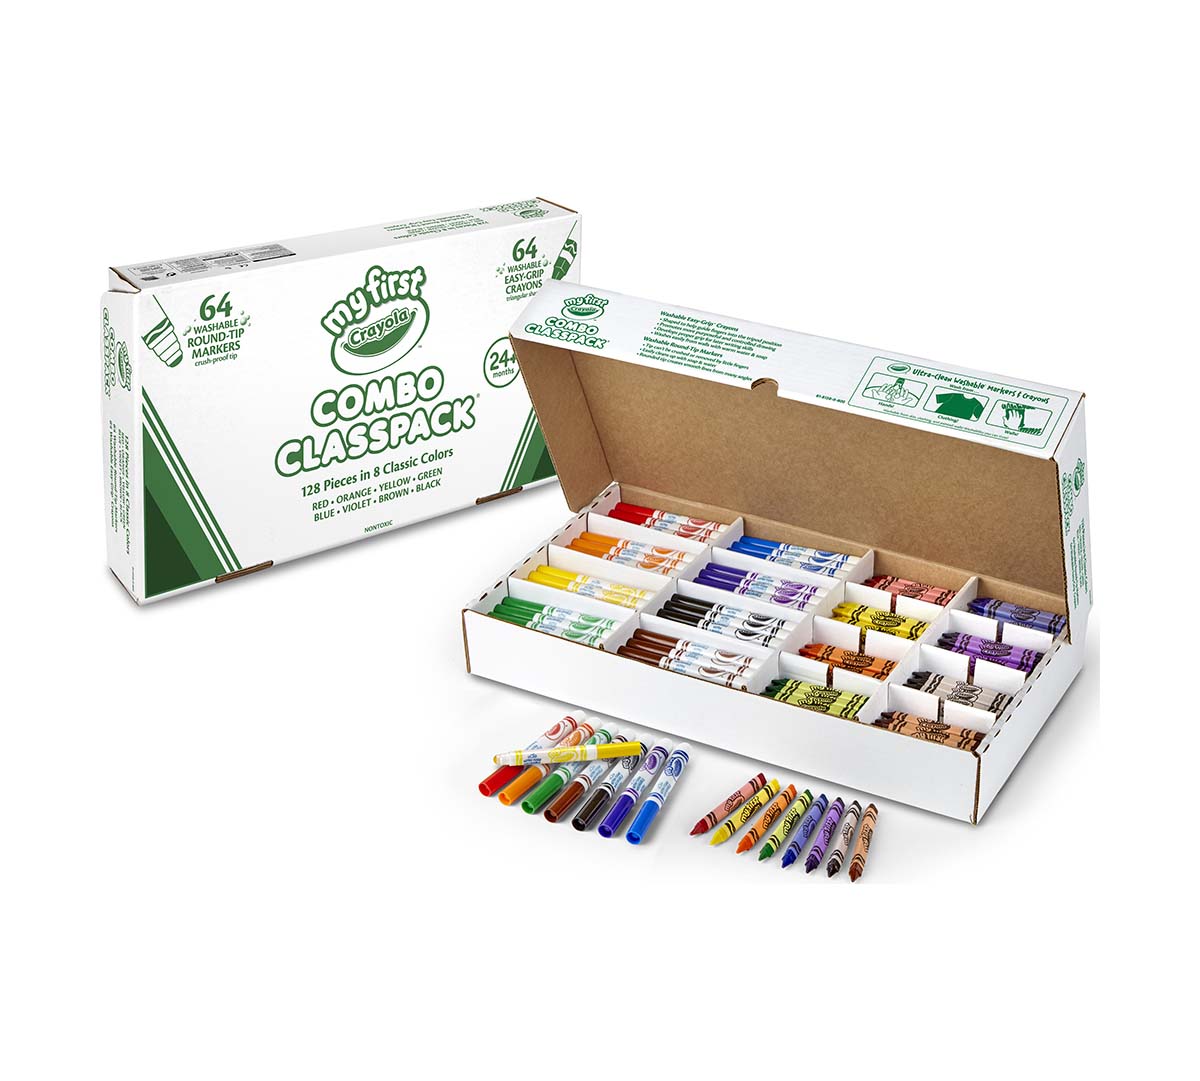 Download Crayola, My First Crayola 128 count Crayons & Marker Combo Classpack, Early Childhood | Crayola